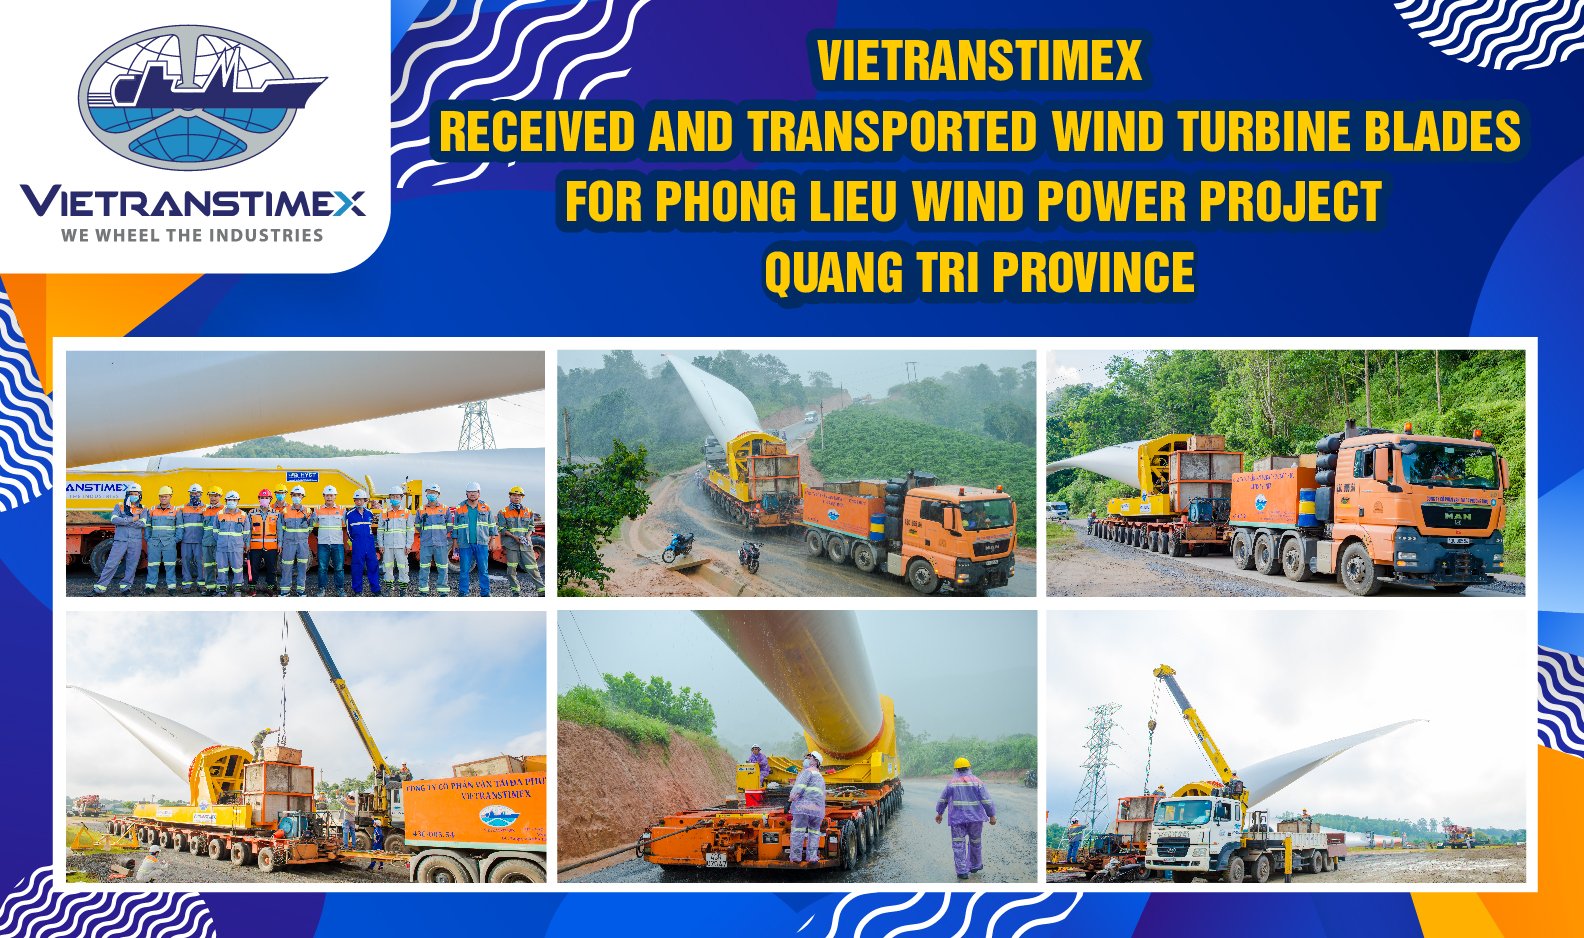 Vietranstimex Received And Transported Wind Turbine Blades For Phong Lieu Wind Power Project – Quang Trị Province